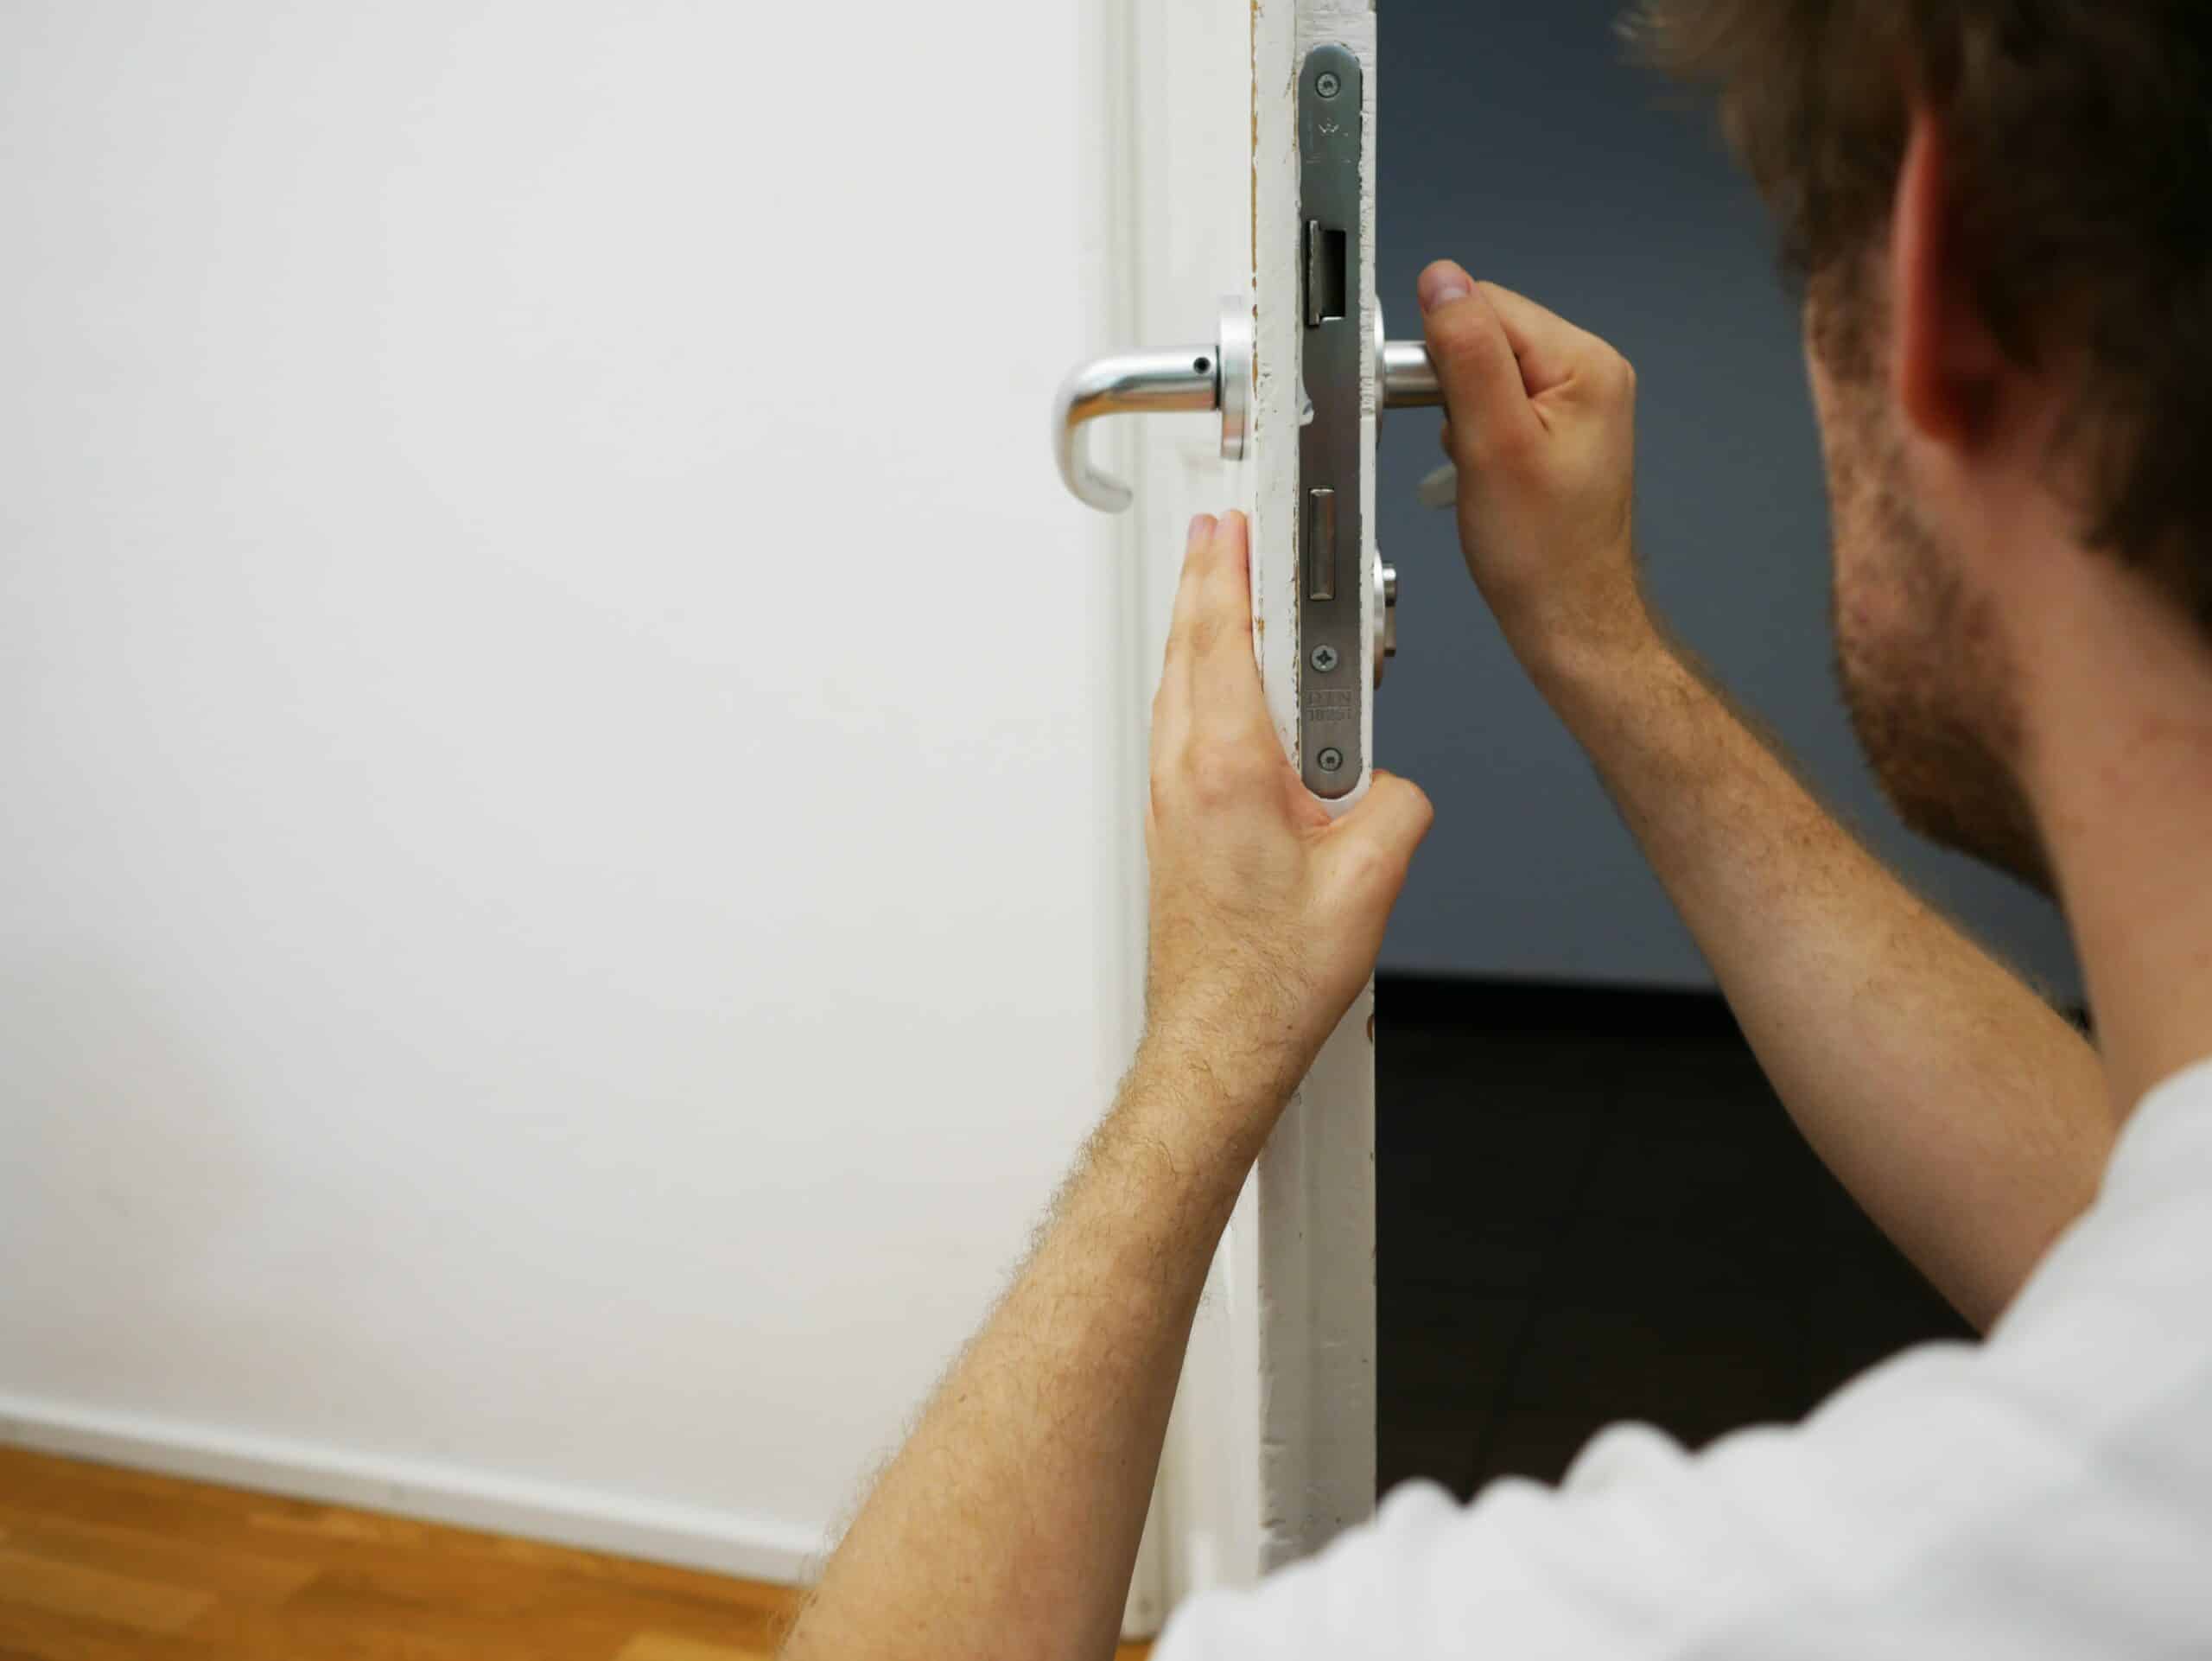 Residential Locksmith changing locks in a house